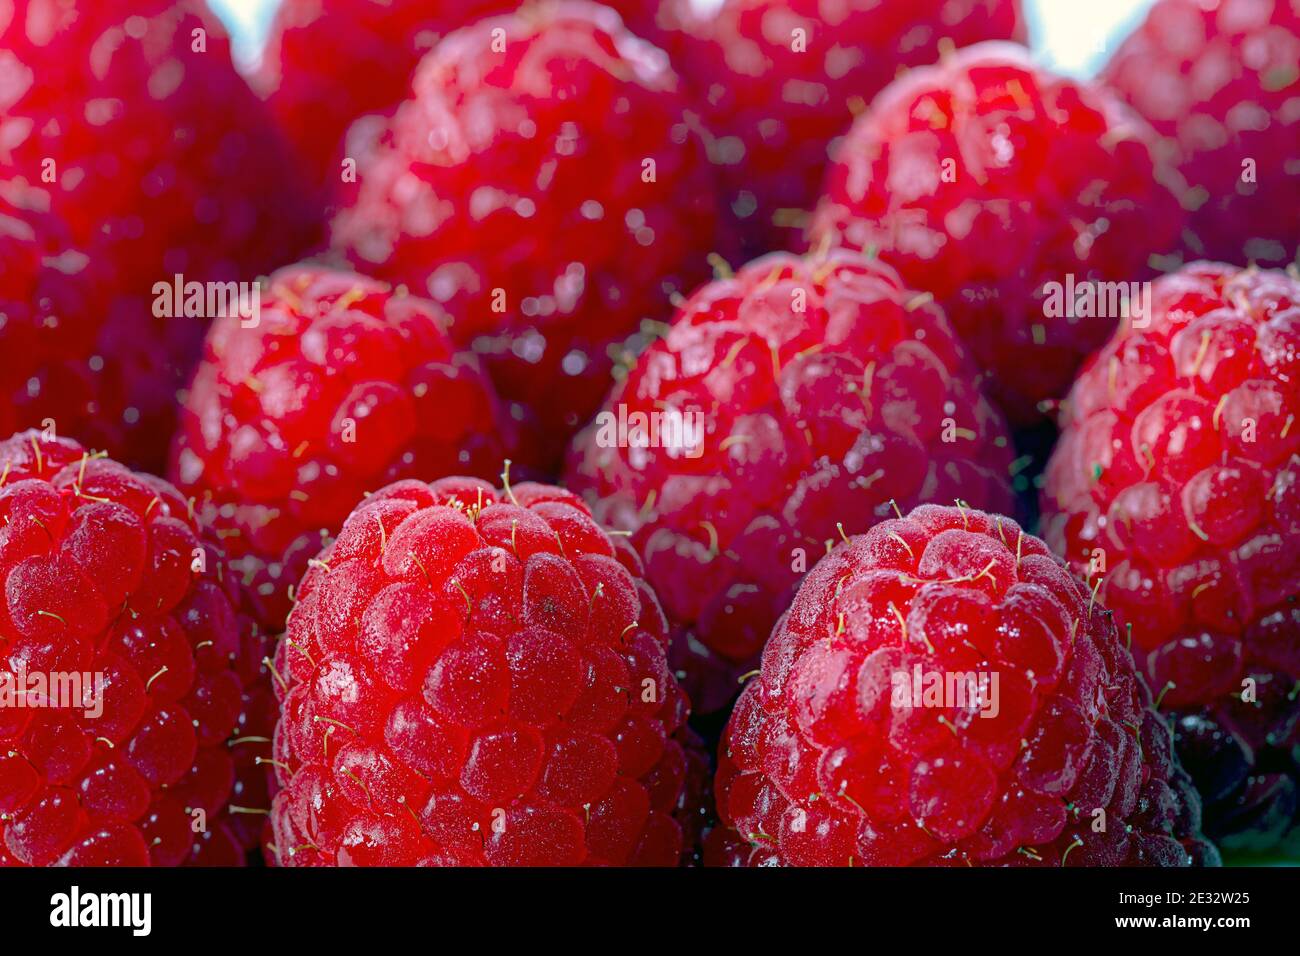 raspberry is the edible fruit of a multitude of plant species in the genus Rubus of the rose family. Stock Photo